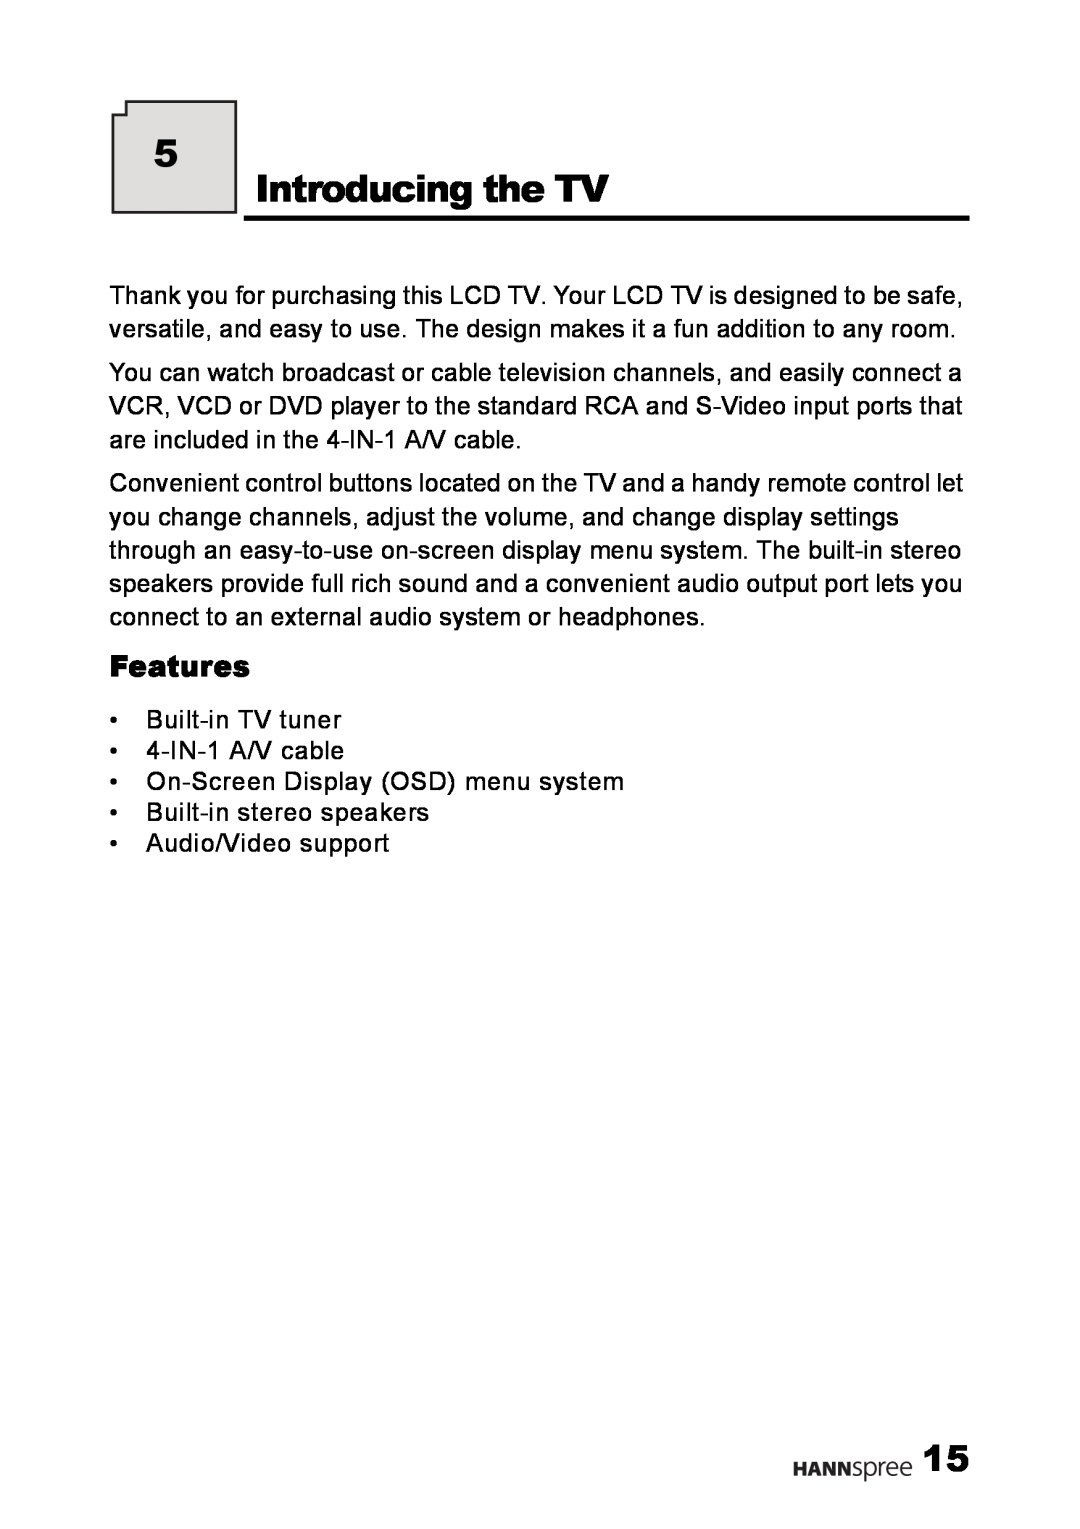 HANNspree LT02-12U1-000 user manual Introducing the TV, Features 